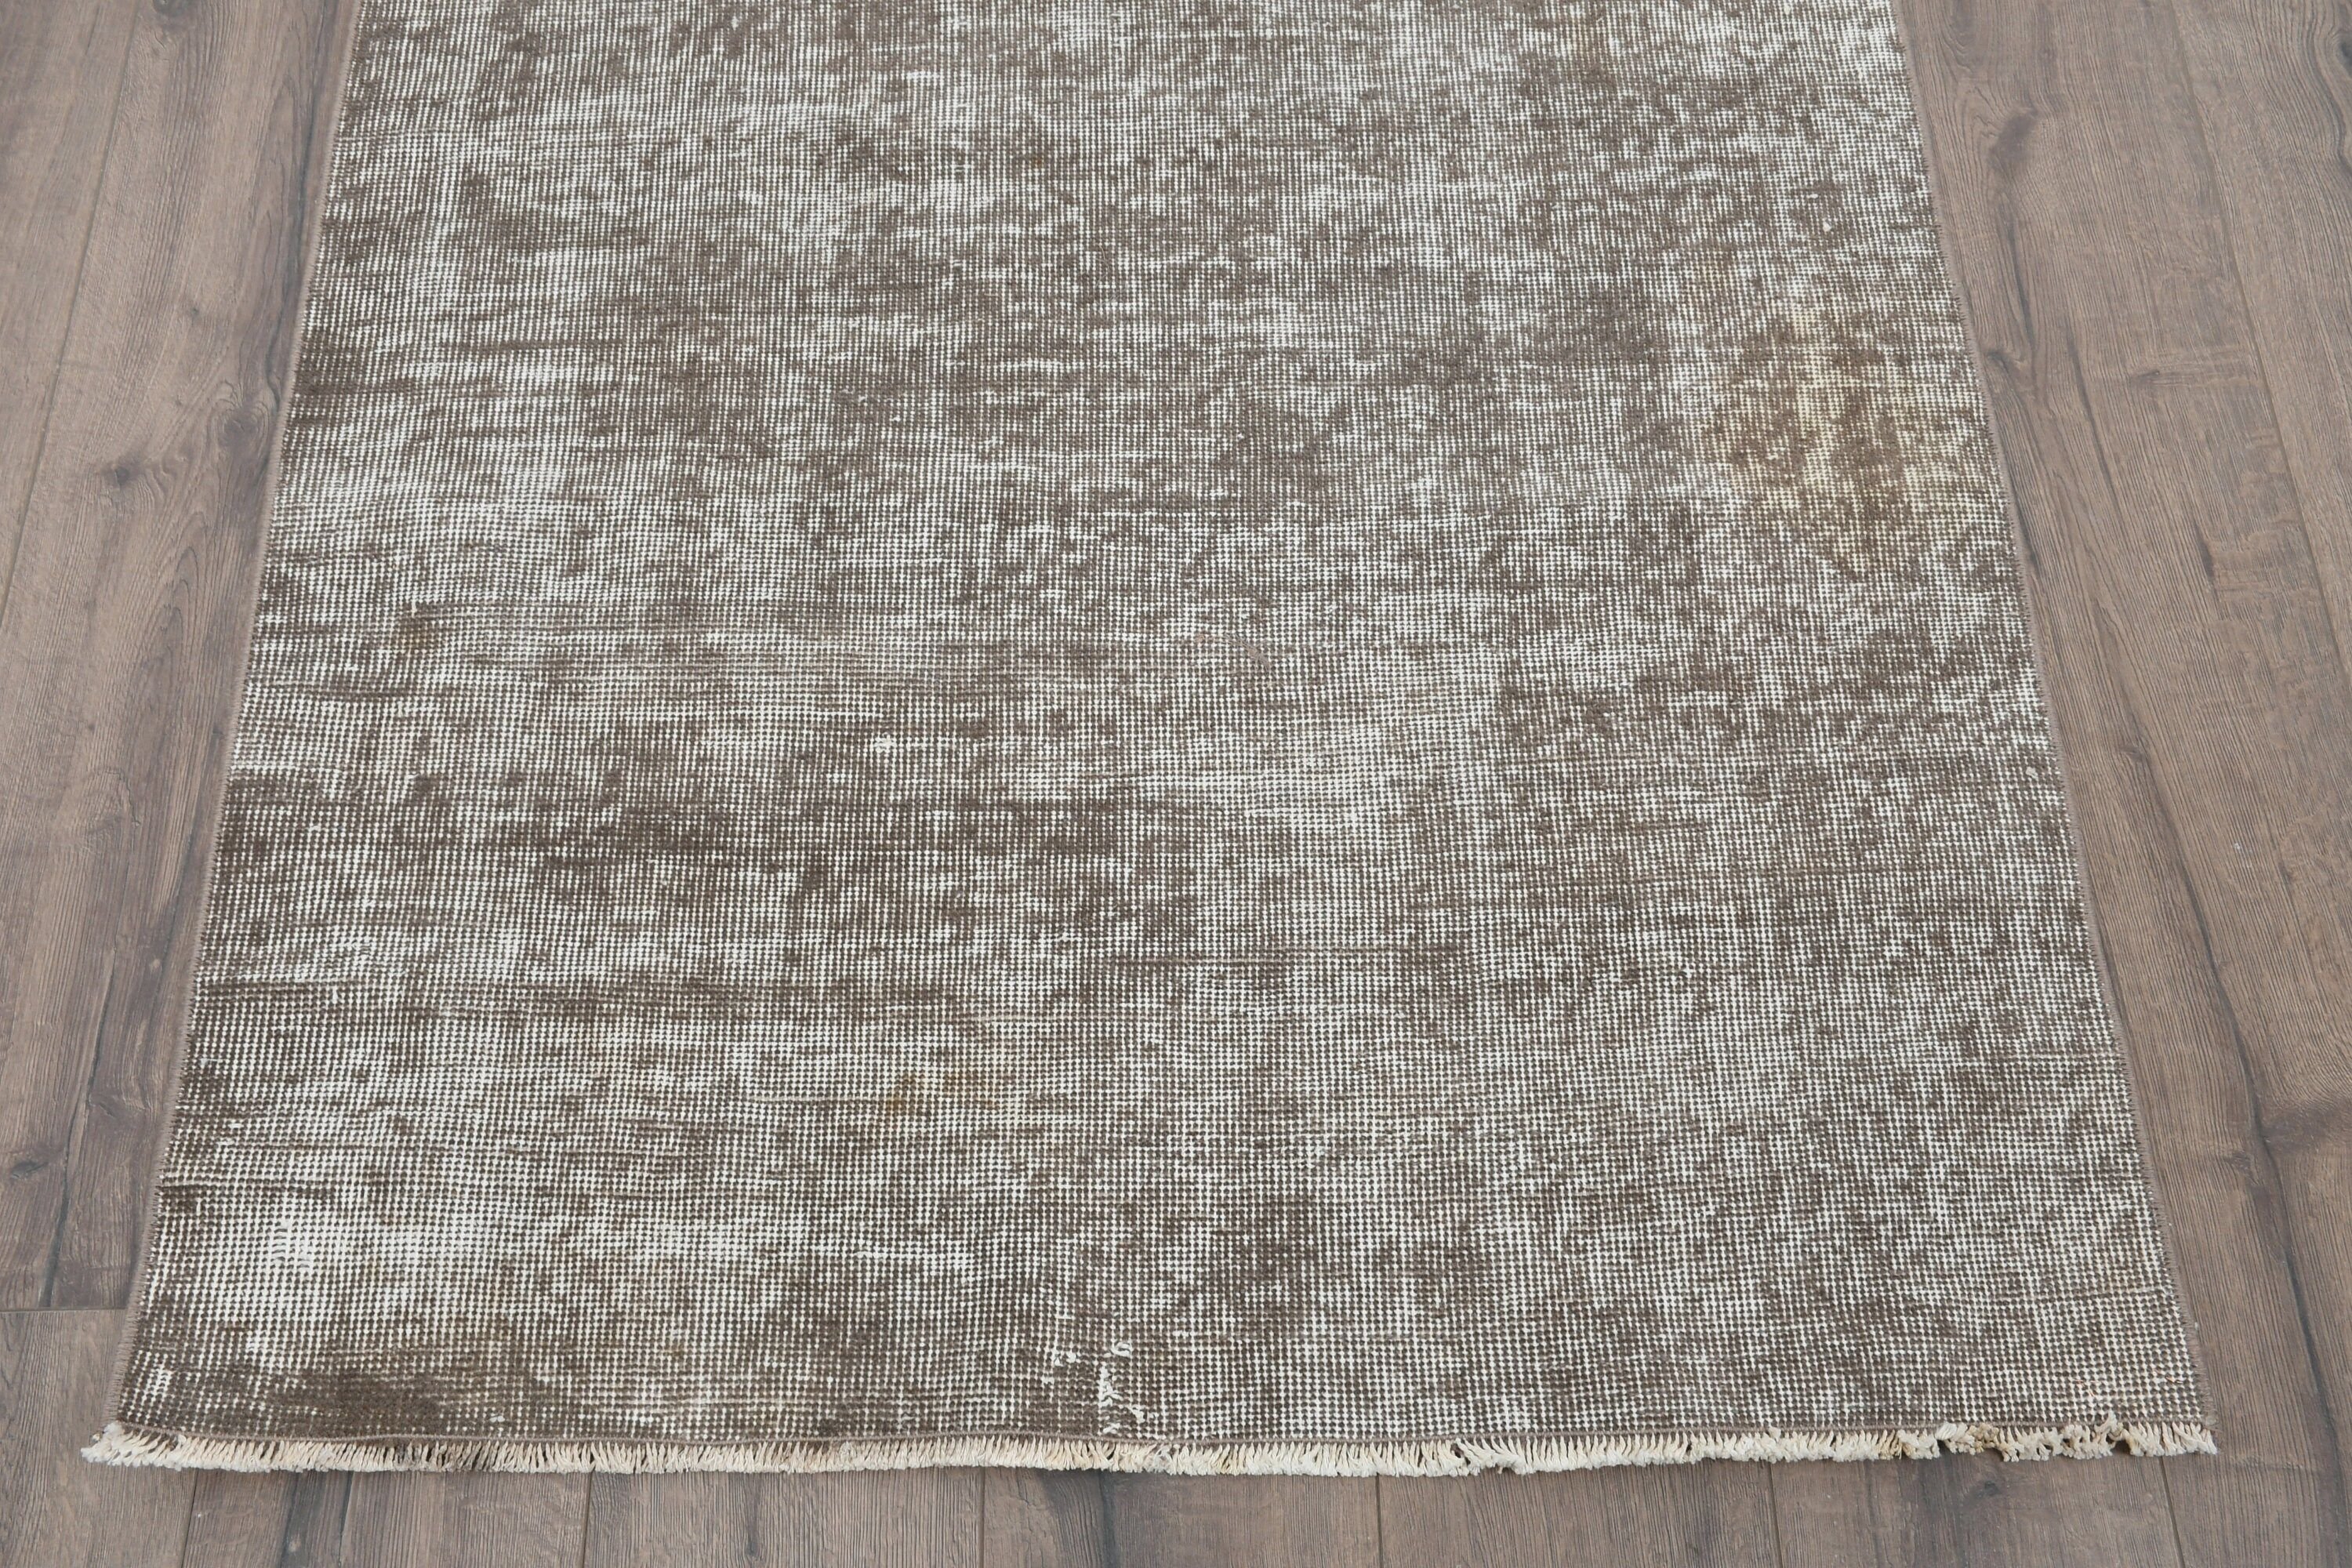 Entry Rug, Bedroom Rug, Rugs for Kitchen, Cool Rugs, Gray  3.3x6.2 ft Accent Rugs, Vintage Rugs, Turkish Rug